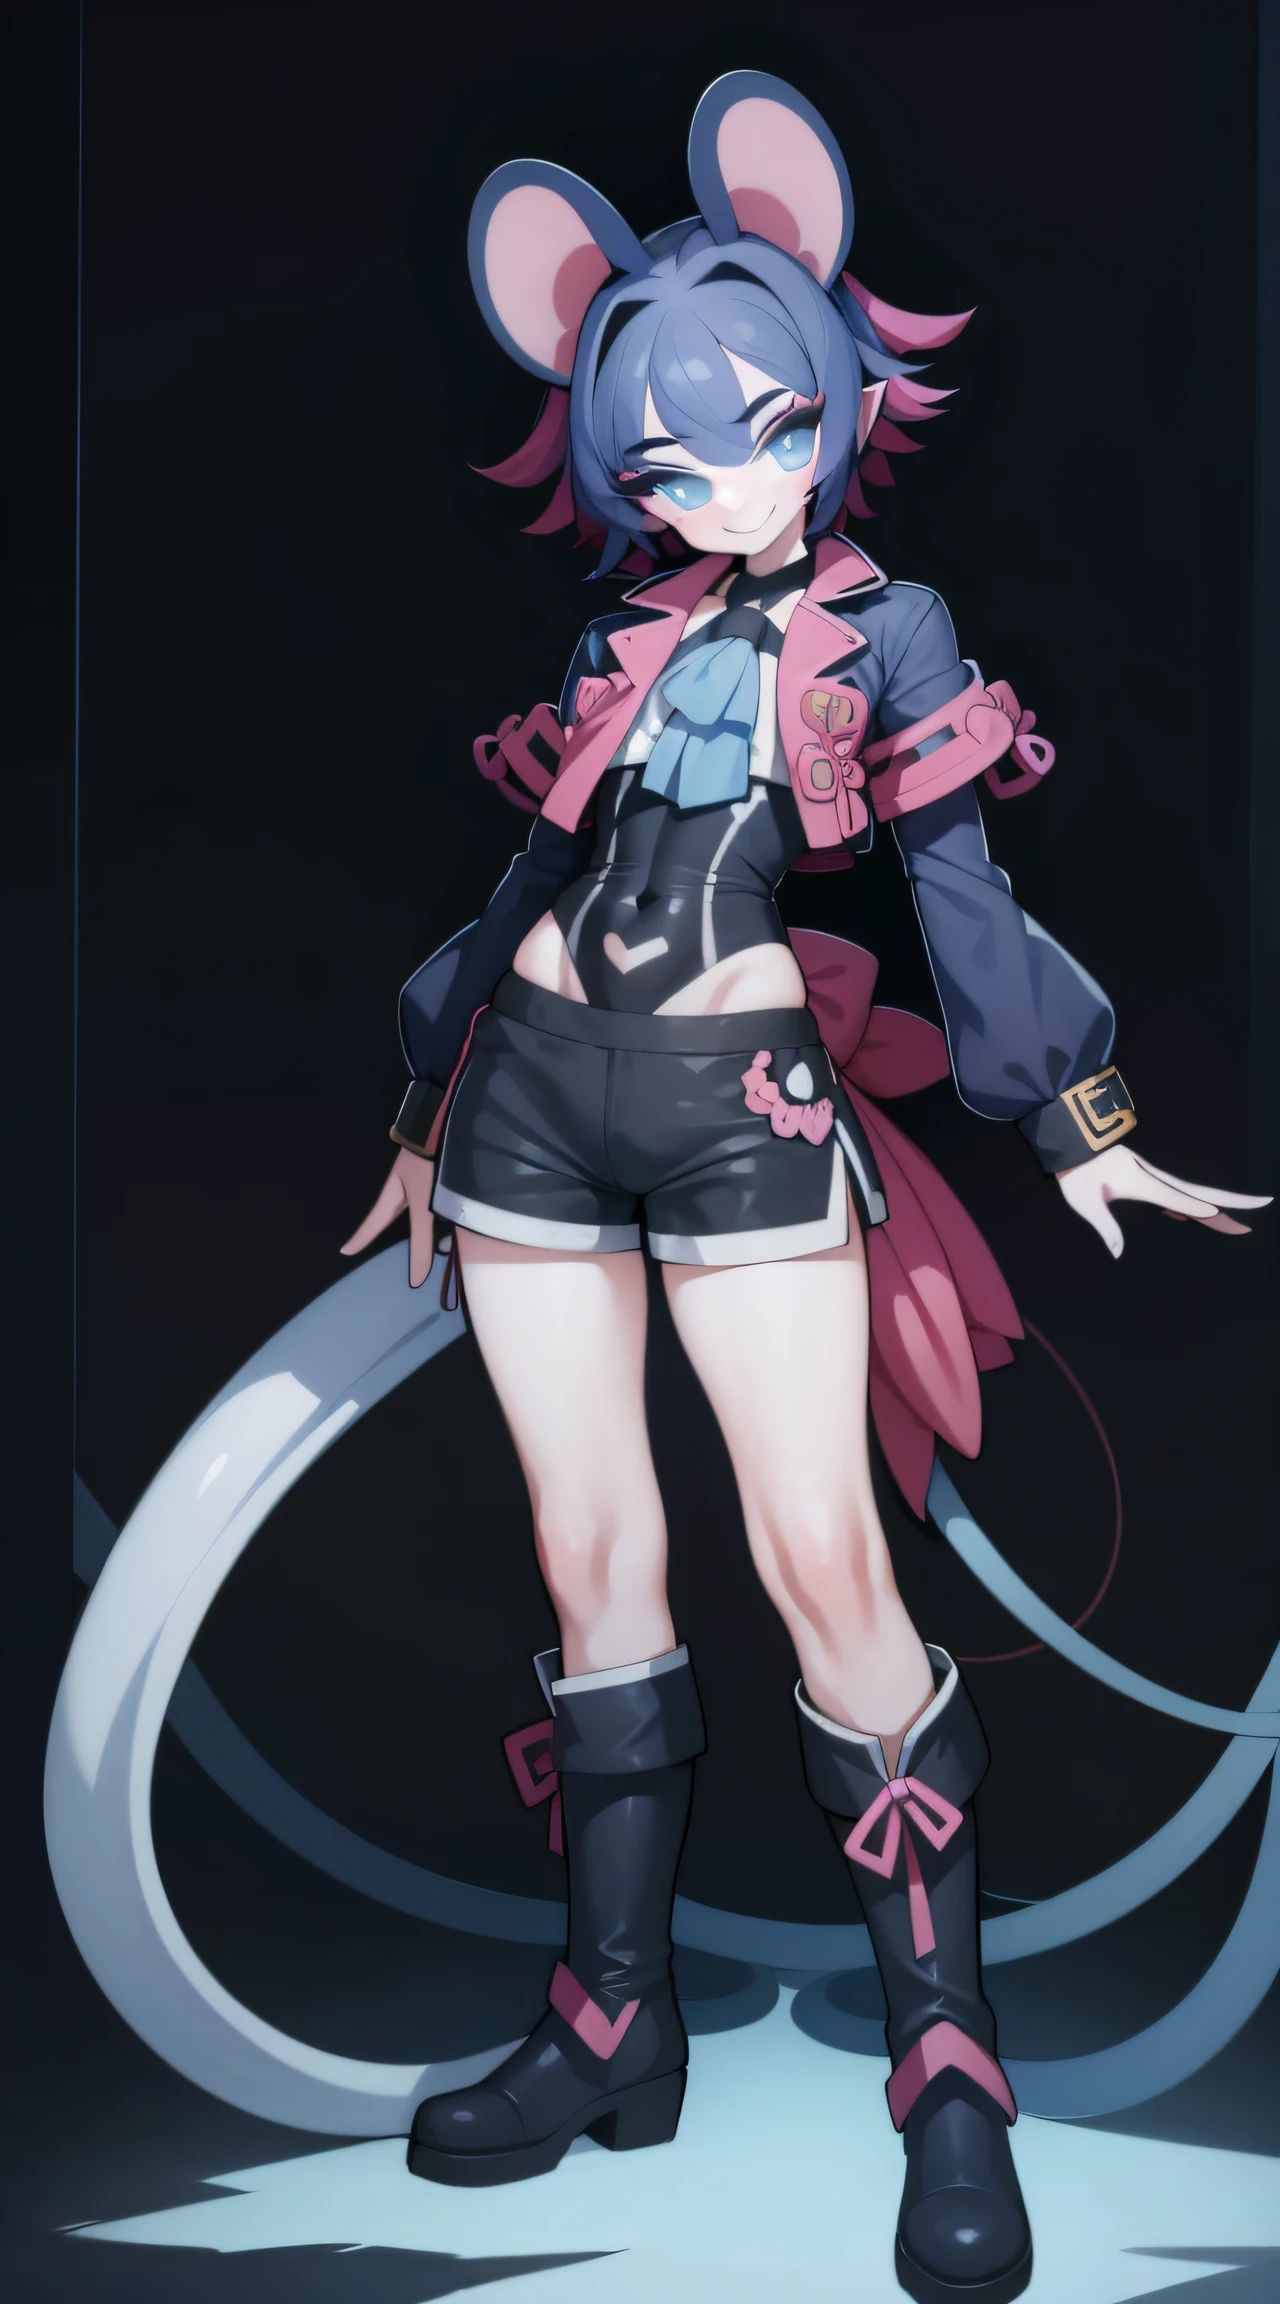 Anime character, high detail, Detailed art style, (canny smile:1.4), short curly hair, little chest, tailcoat, Short shorts, full length, the perfect body, Colors: black & Blue,  (1 boy:1.2), with ears and tail, Like a mouse, The body is like a girl's, Long, Tight-fitting boots, Dark background, Glowing Neon Eyes